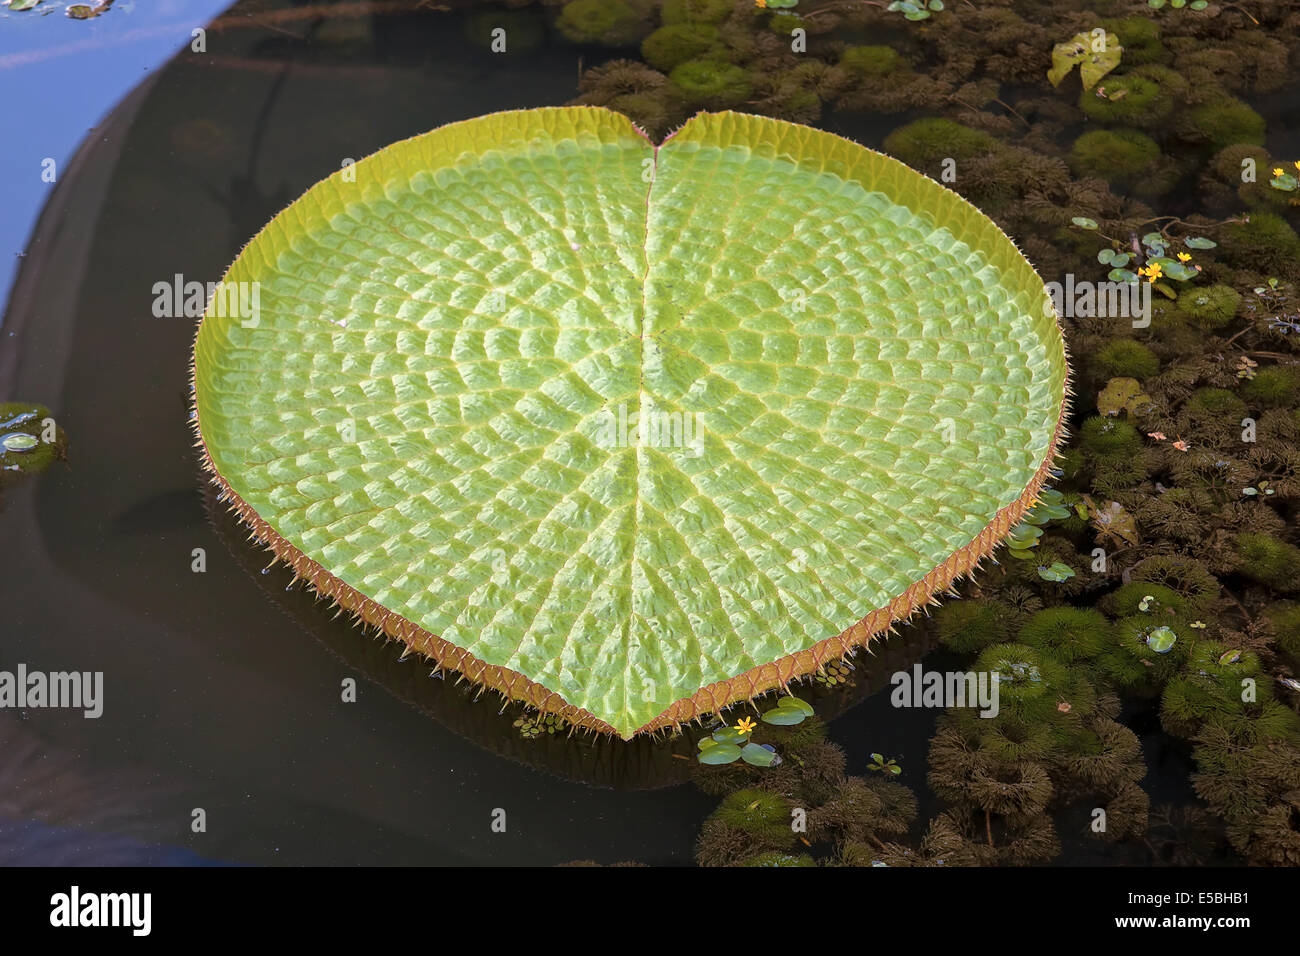 Giant Amazonian Water Lily Pads Floating in Lake Closeup Stock Photo